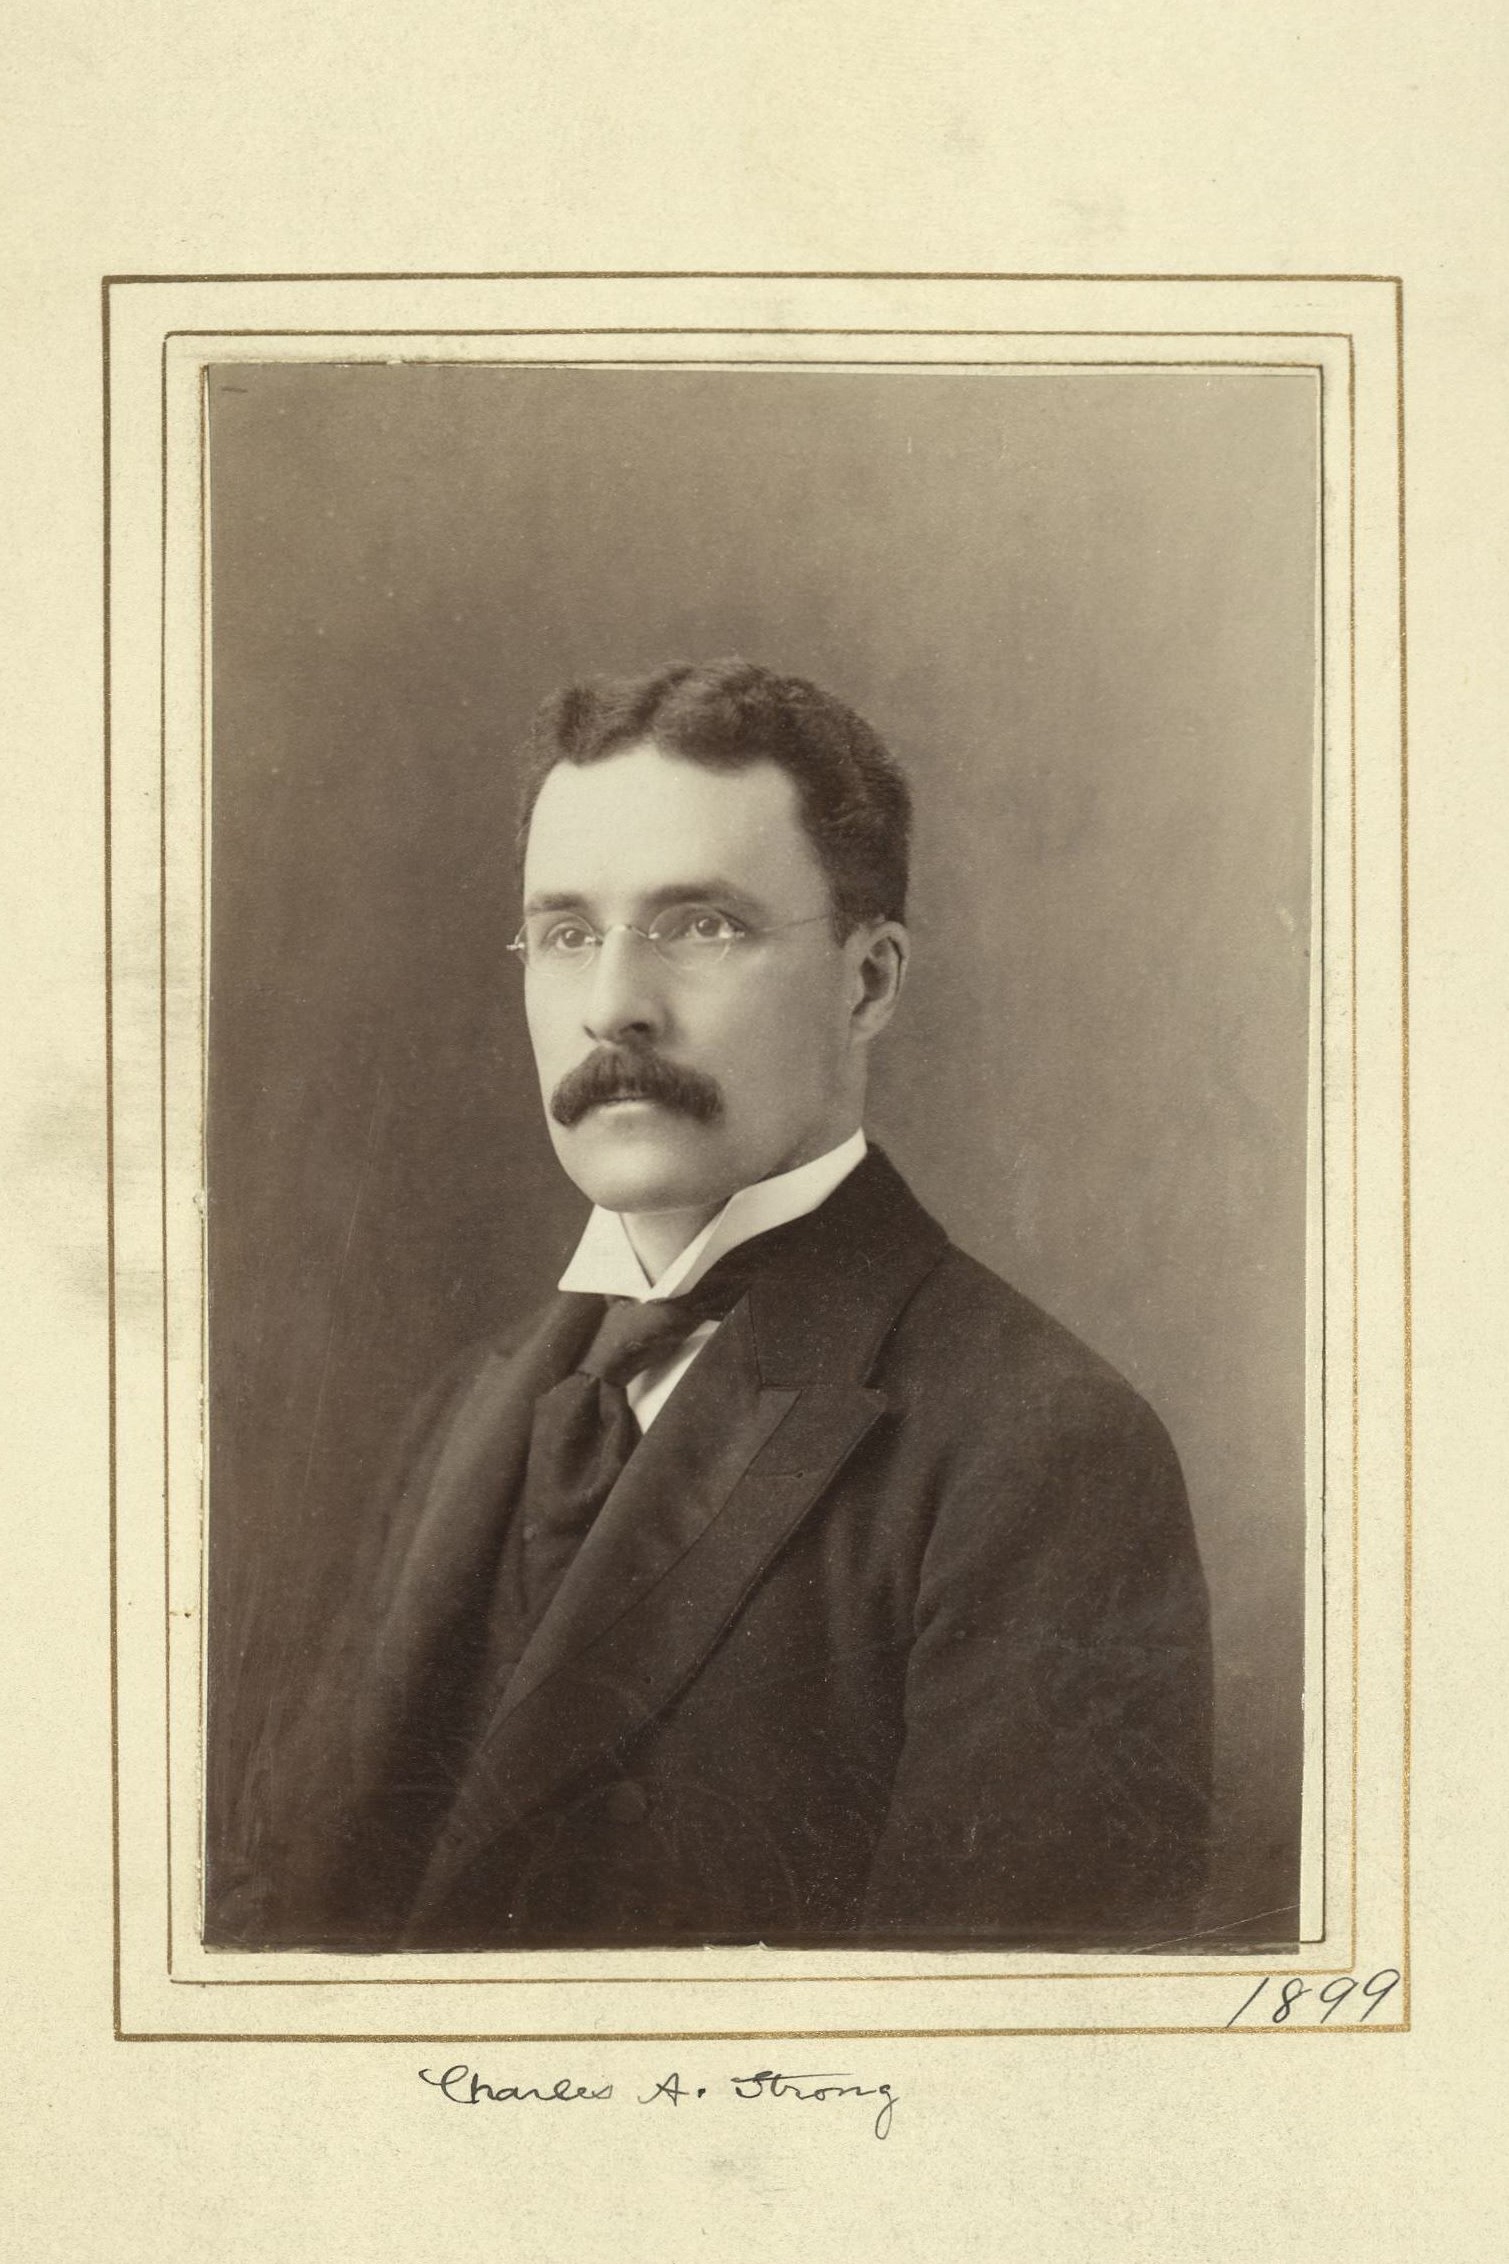 Member portrait of Charles A. Strong